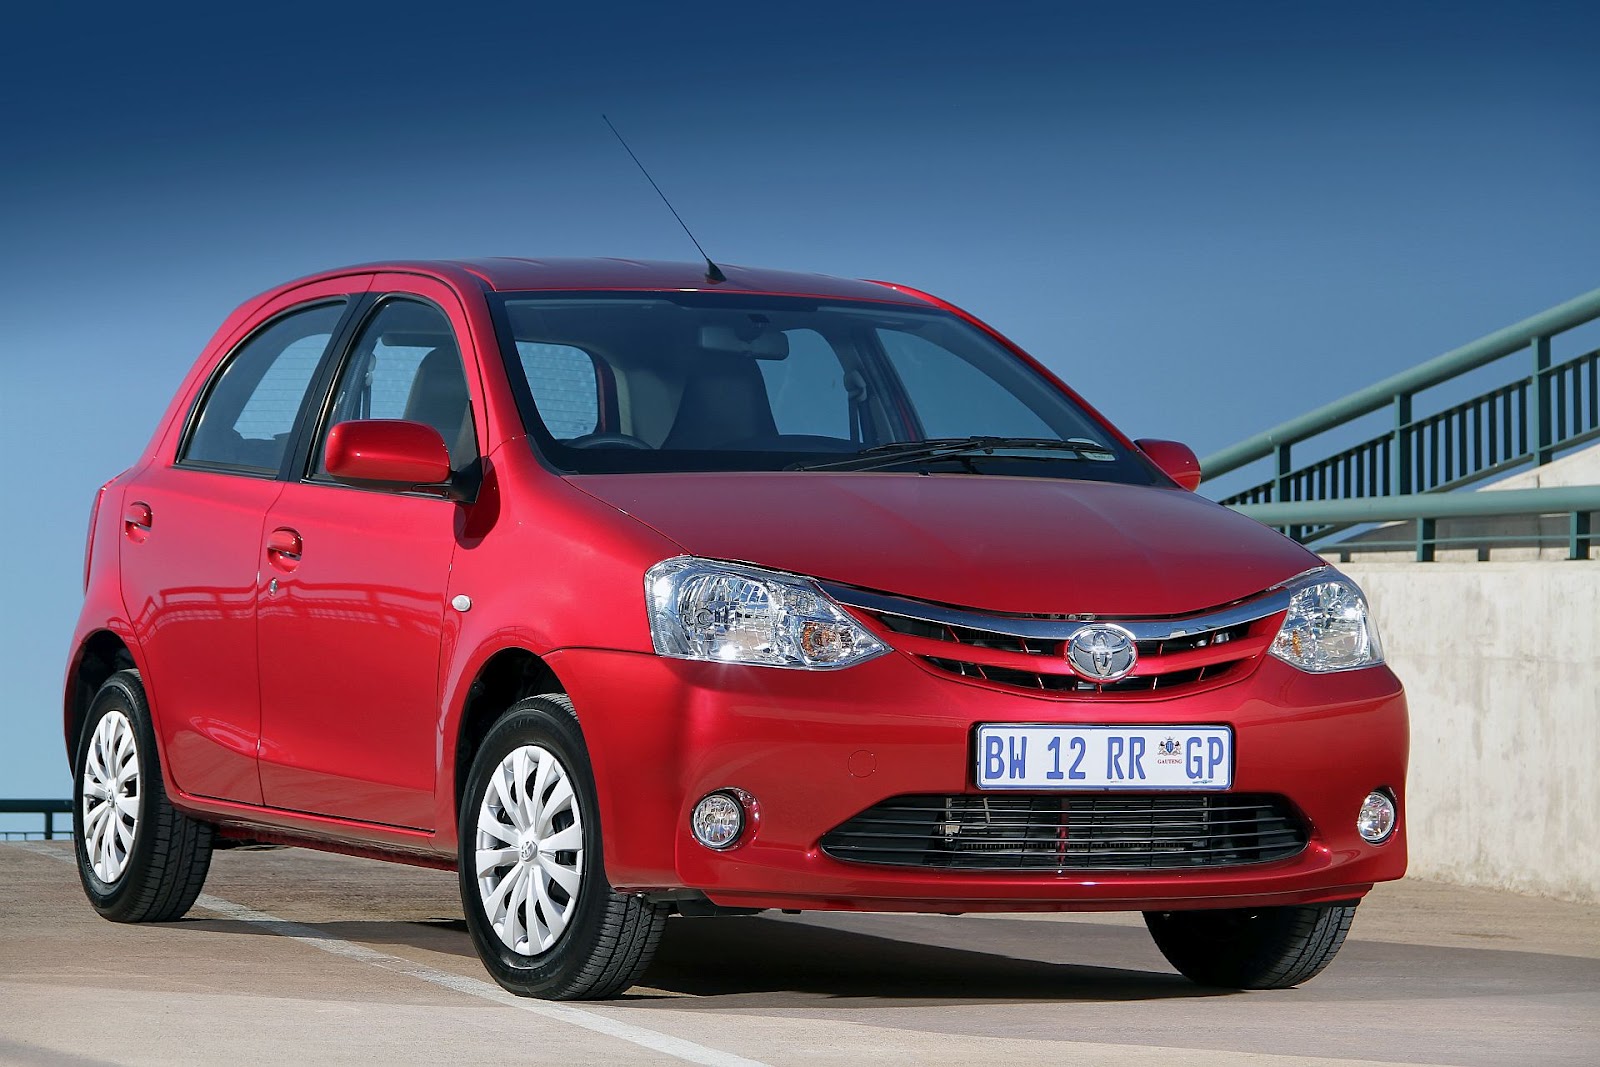 IN4RIDE TOYOTA ETIOS TAZZ REPLACEMENT LAUNCHED IN SA